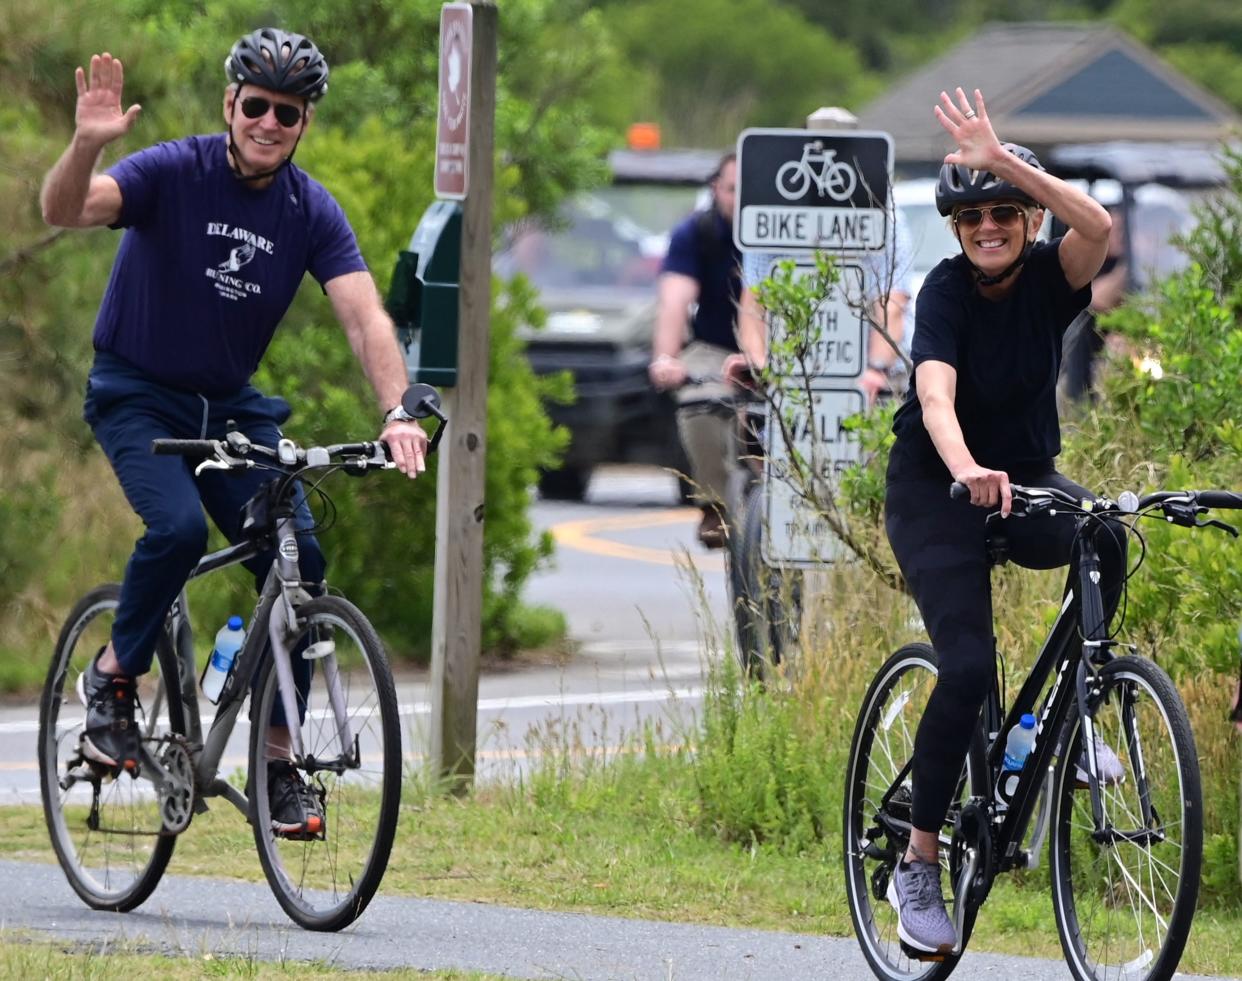 US President Joe Biden (L) and First Lady Jill Biden ride bicycles in Cape Henlopen State Park on June 3, 2021, in Lewes, Delaware. (Photo by JIM WATSON / AFP) (Photo by JIM WATSON/AFP via Getty Images)